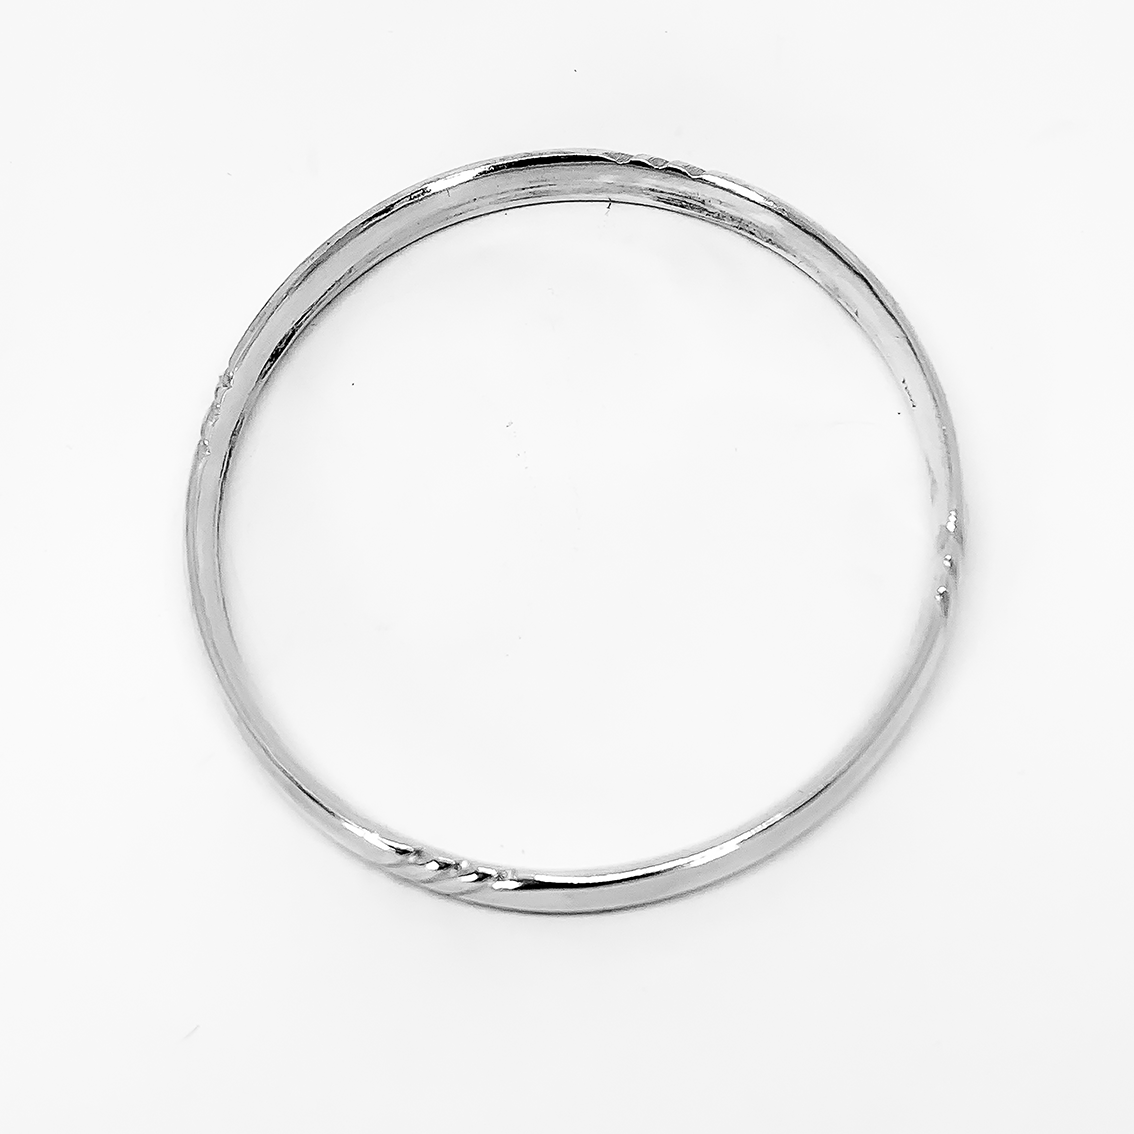 Heavy Sterling Silver Bangle